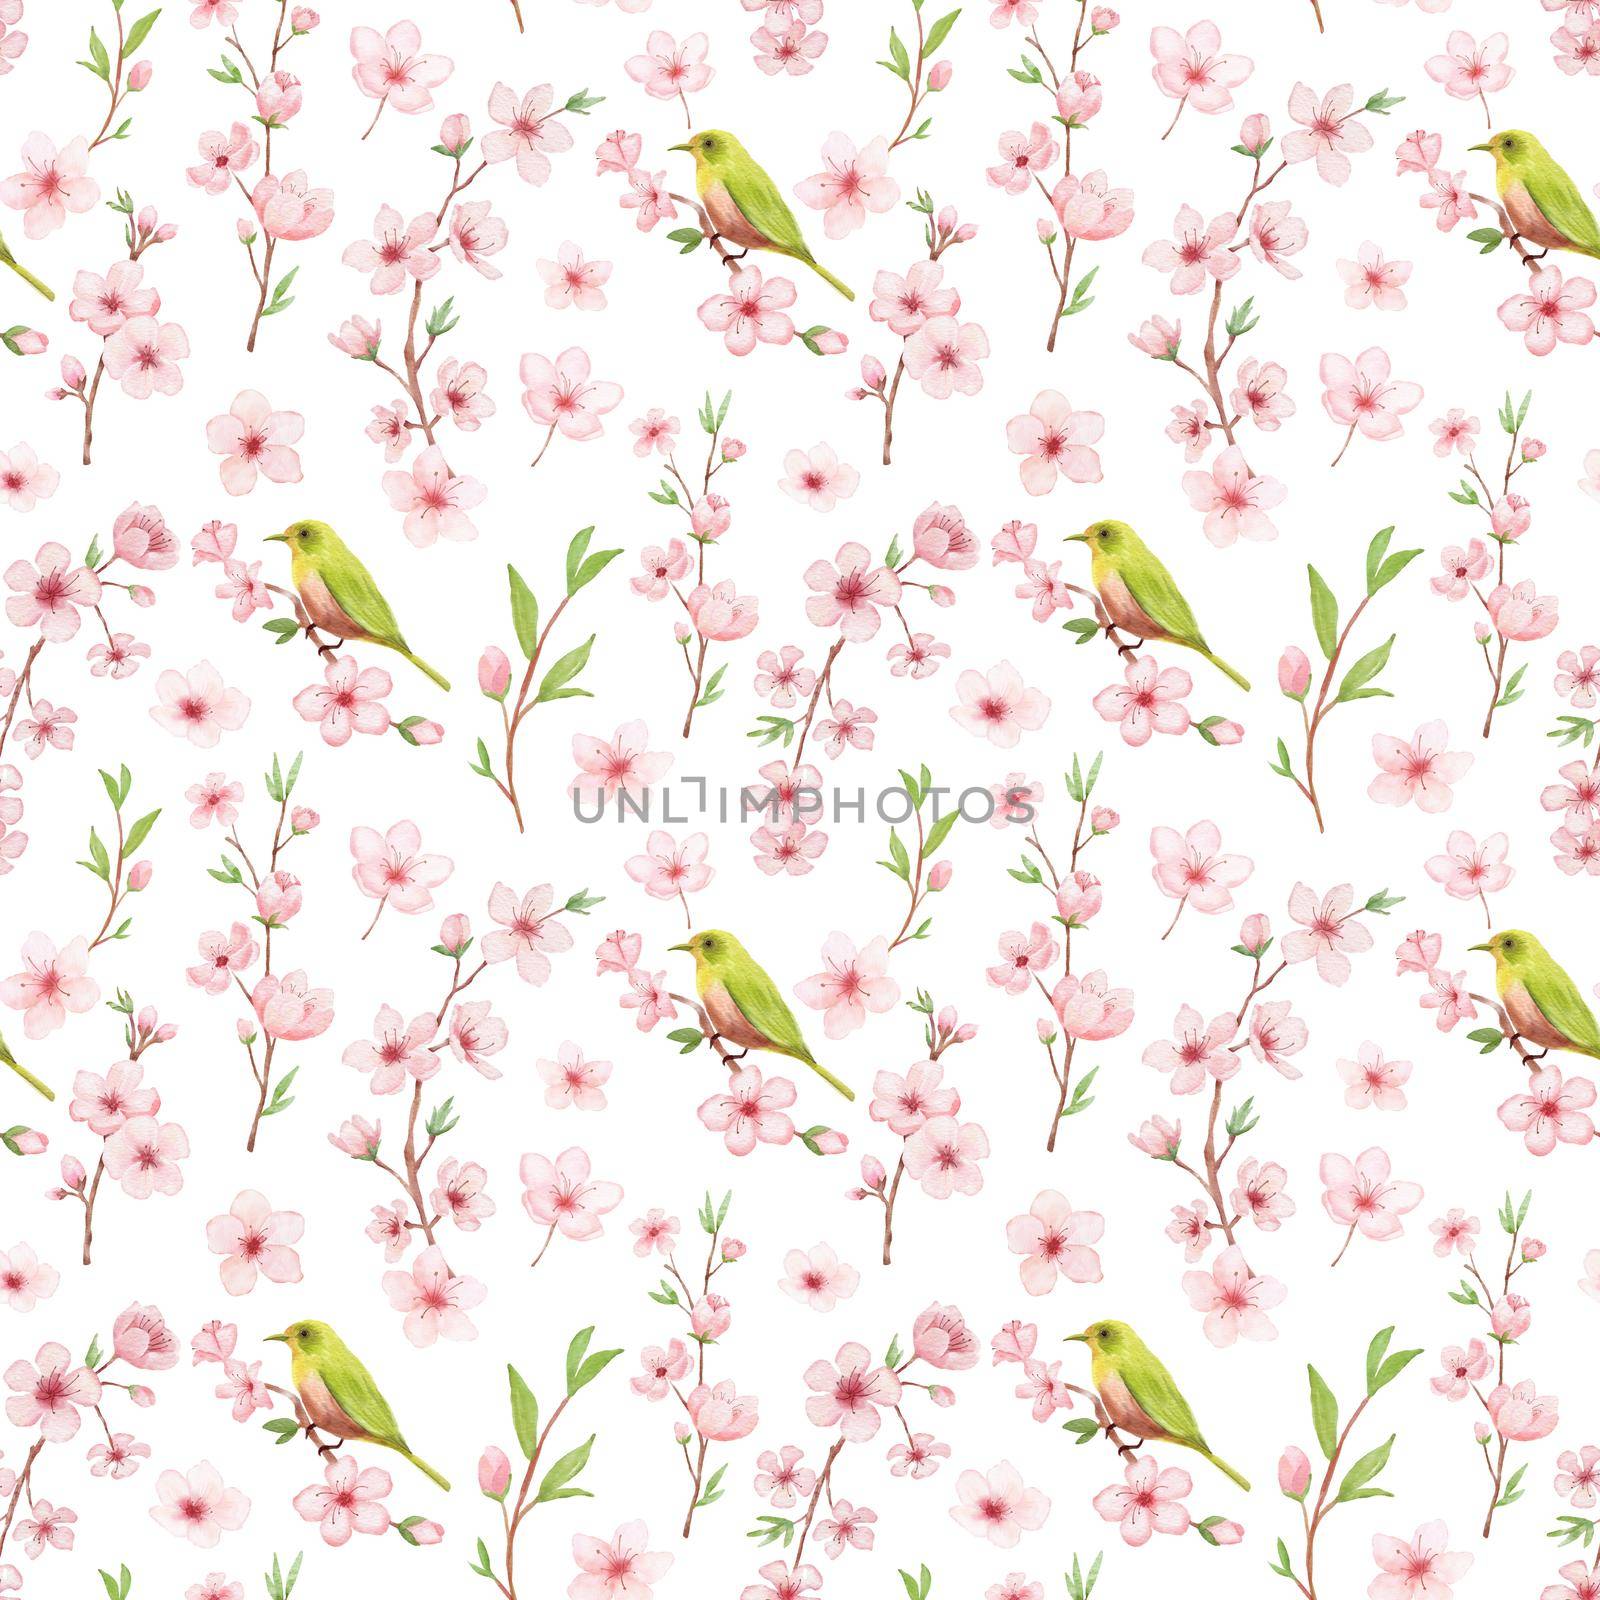 Branch of Cherry blossom watercolor seamless pattern on white backgraund. Japanese flowers and bird. Floral background by ElenaPlatova